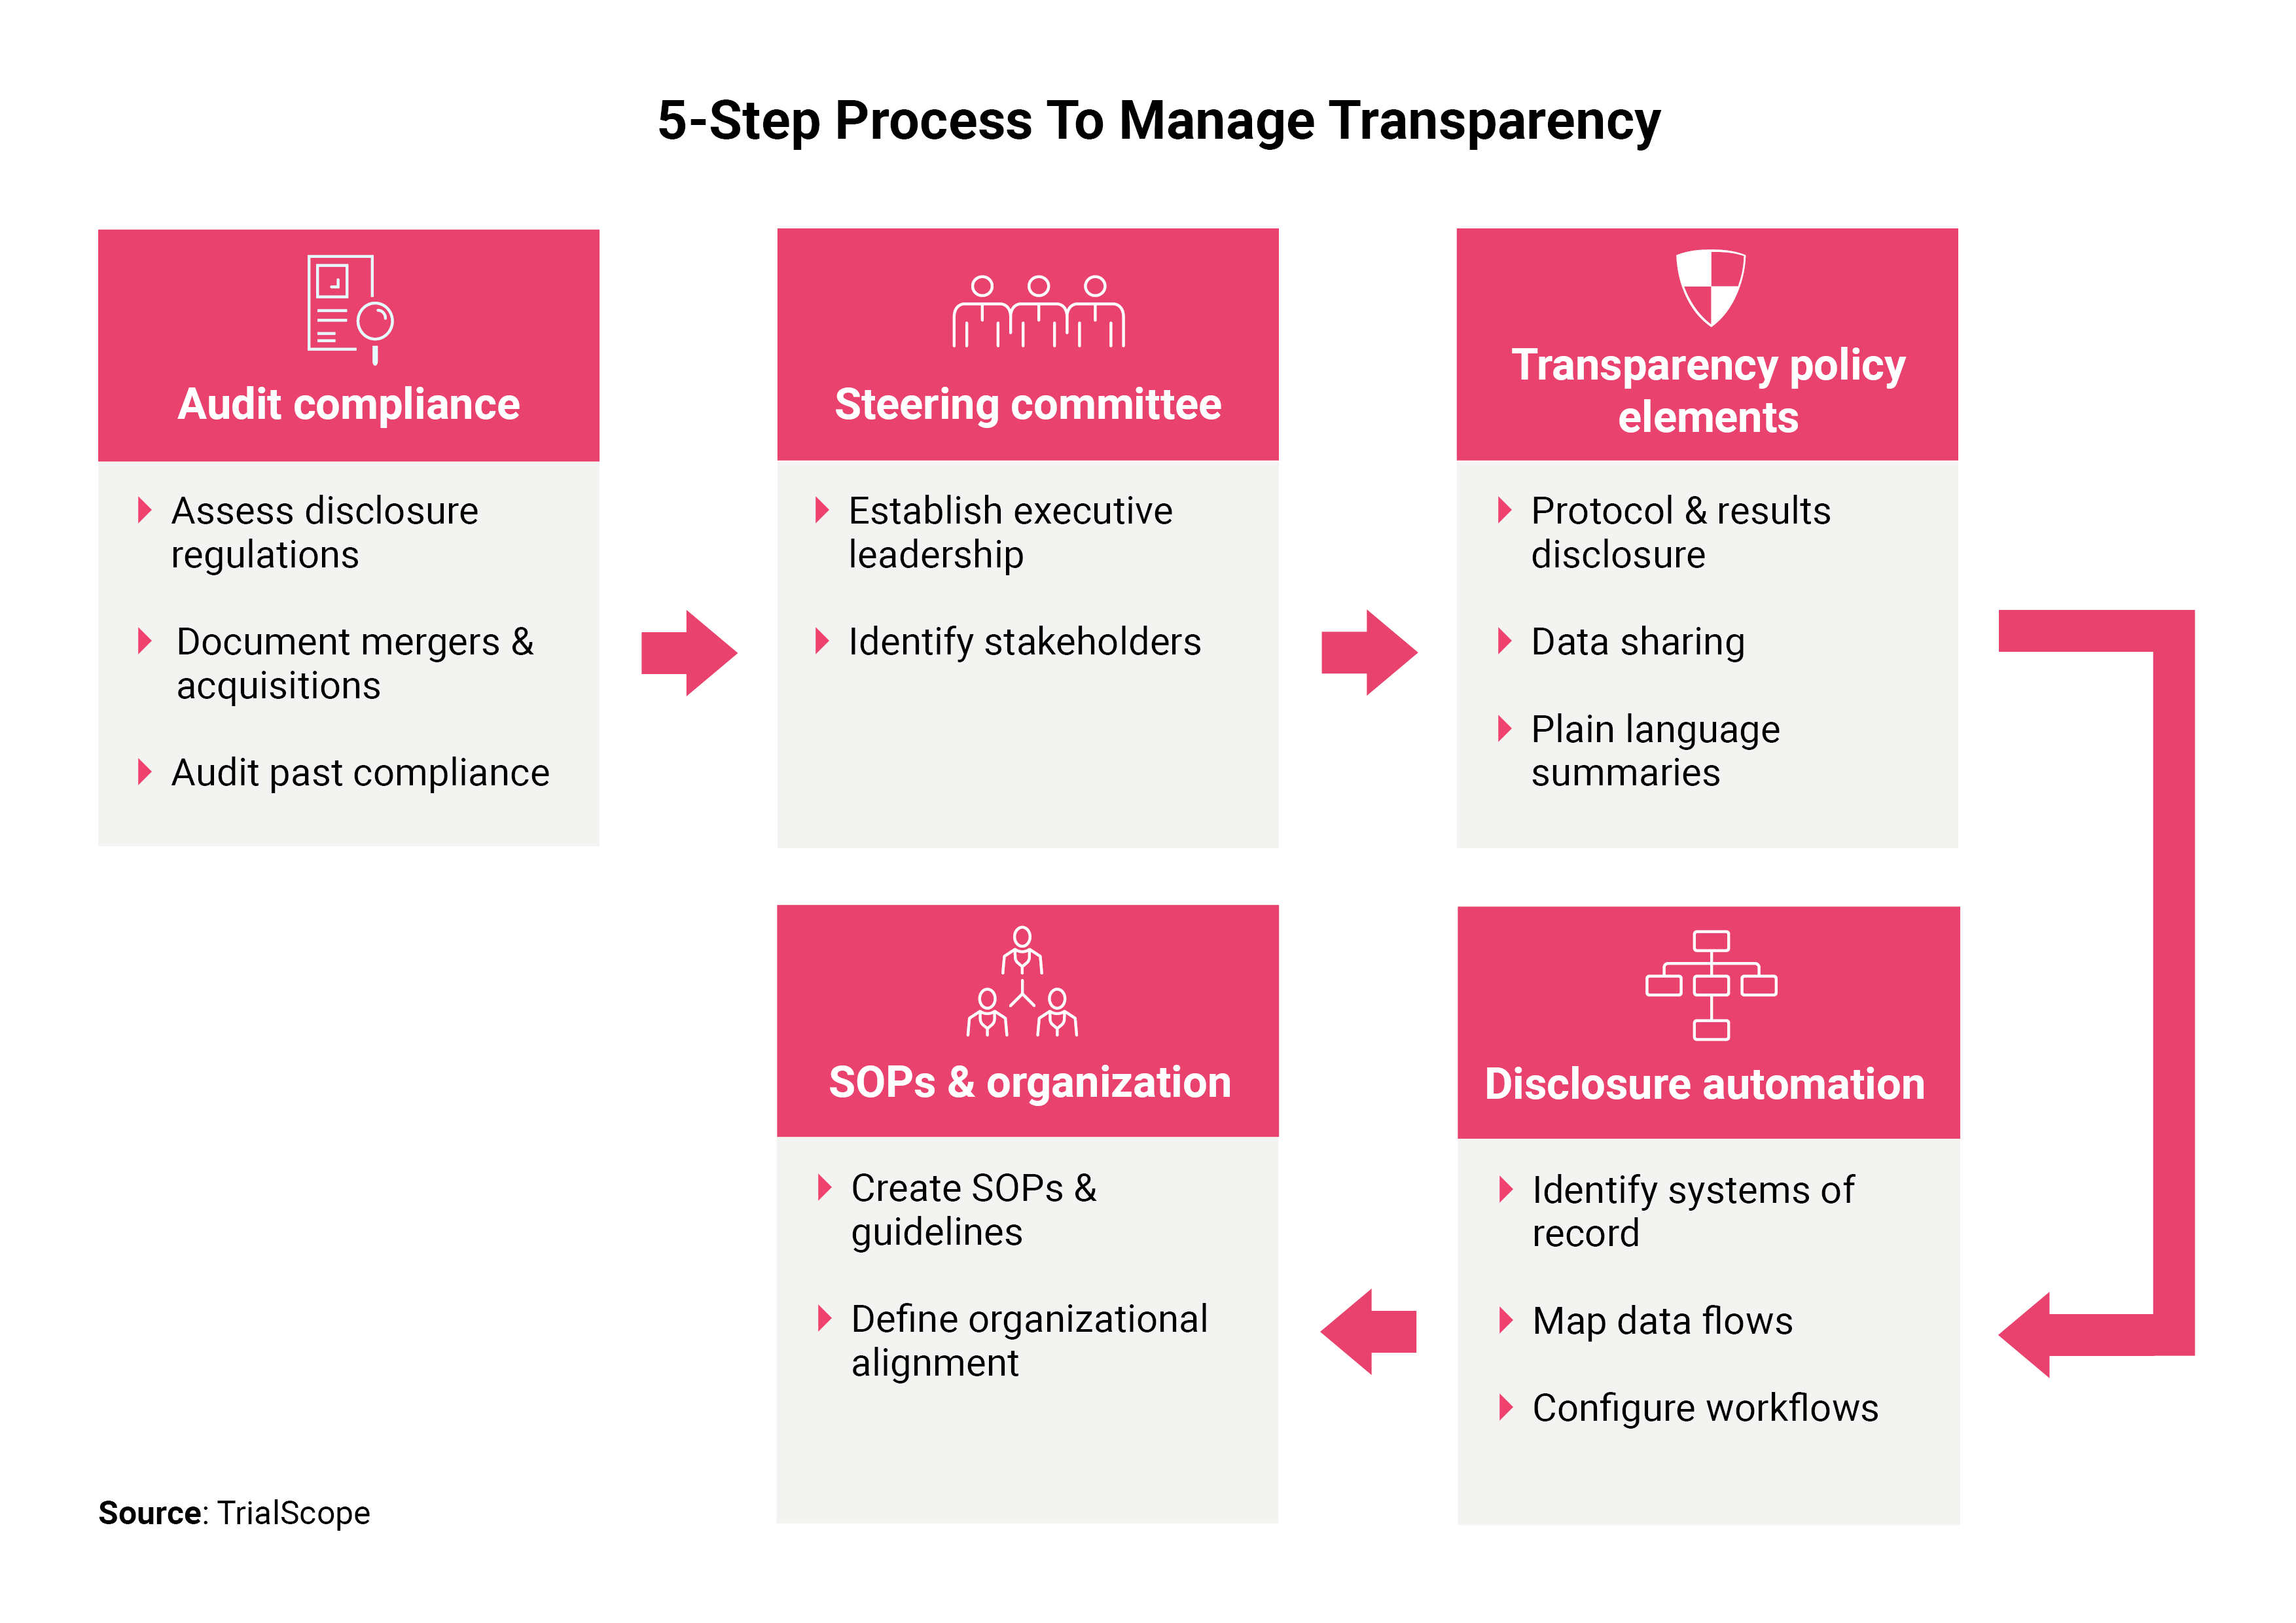 5-Step Process to Manage Transparency